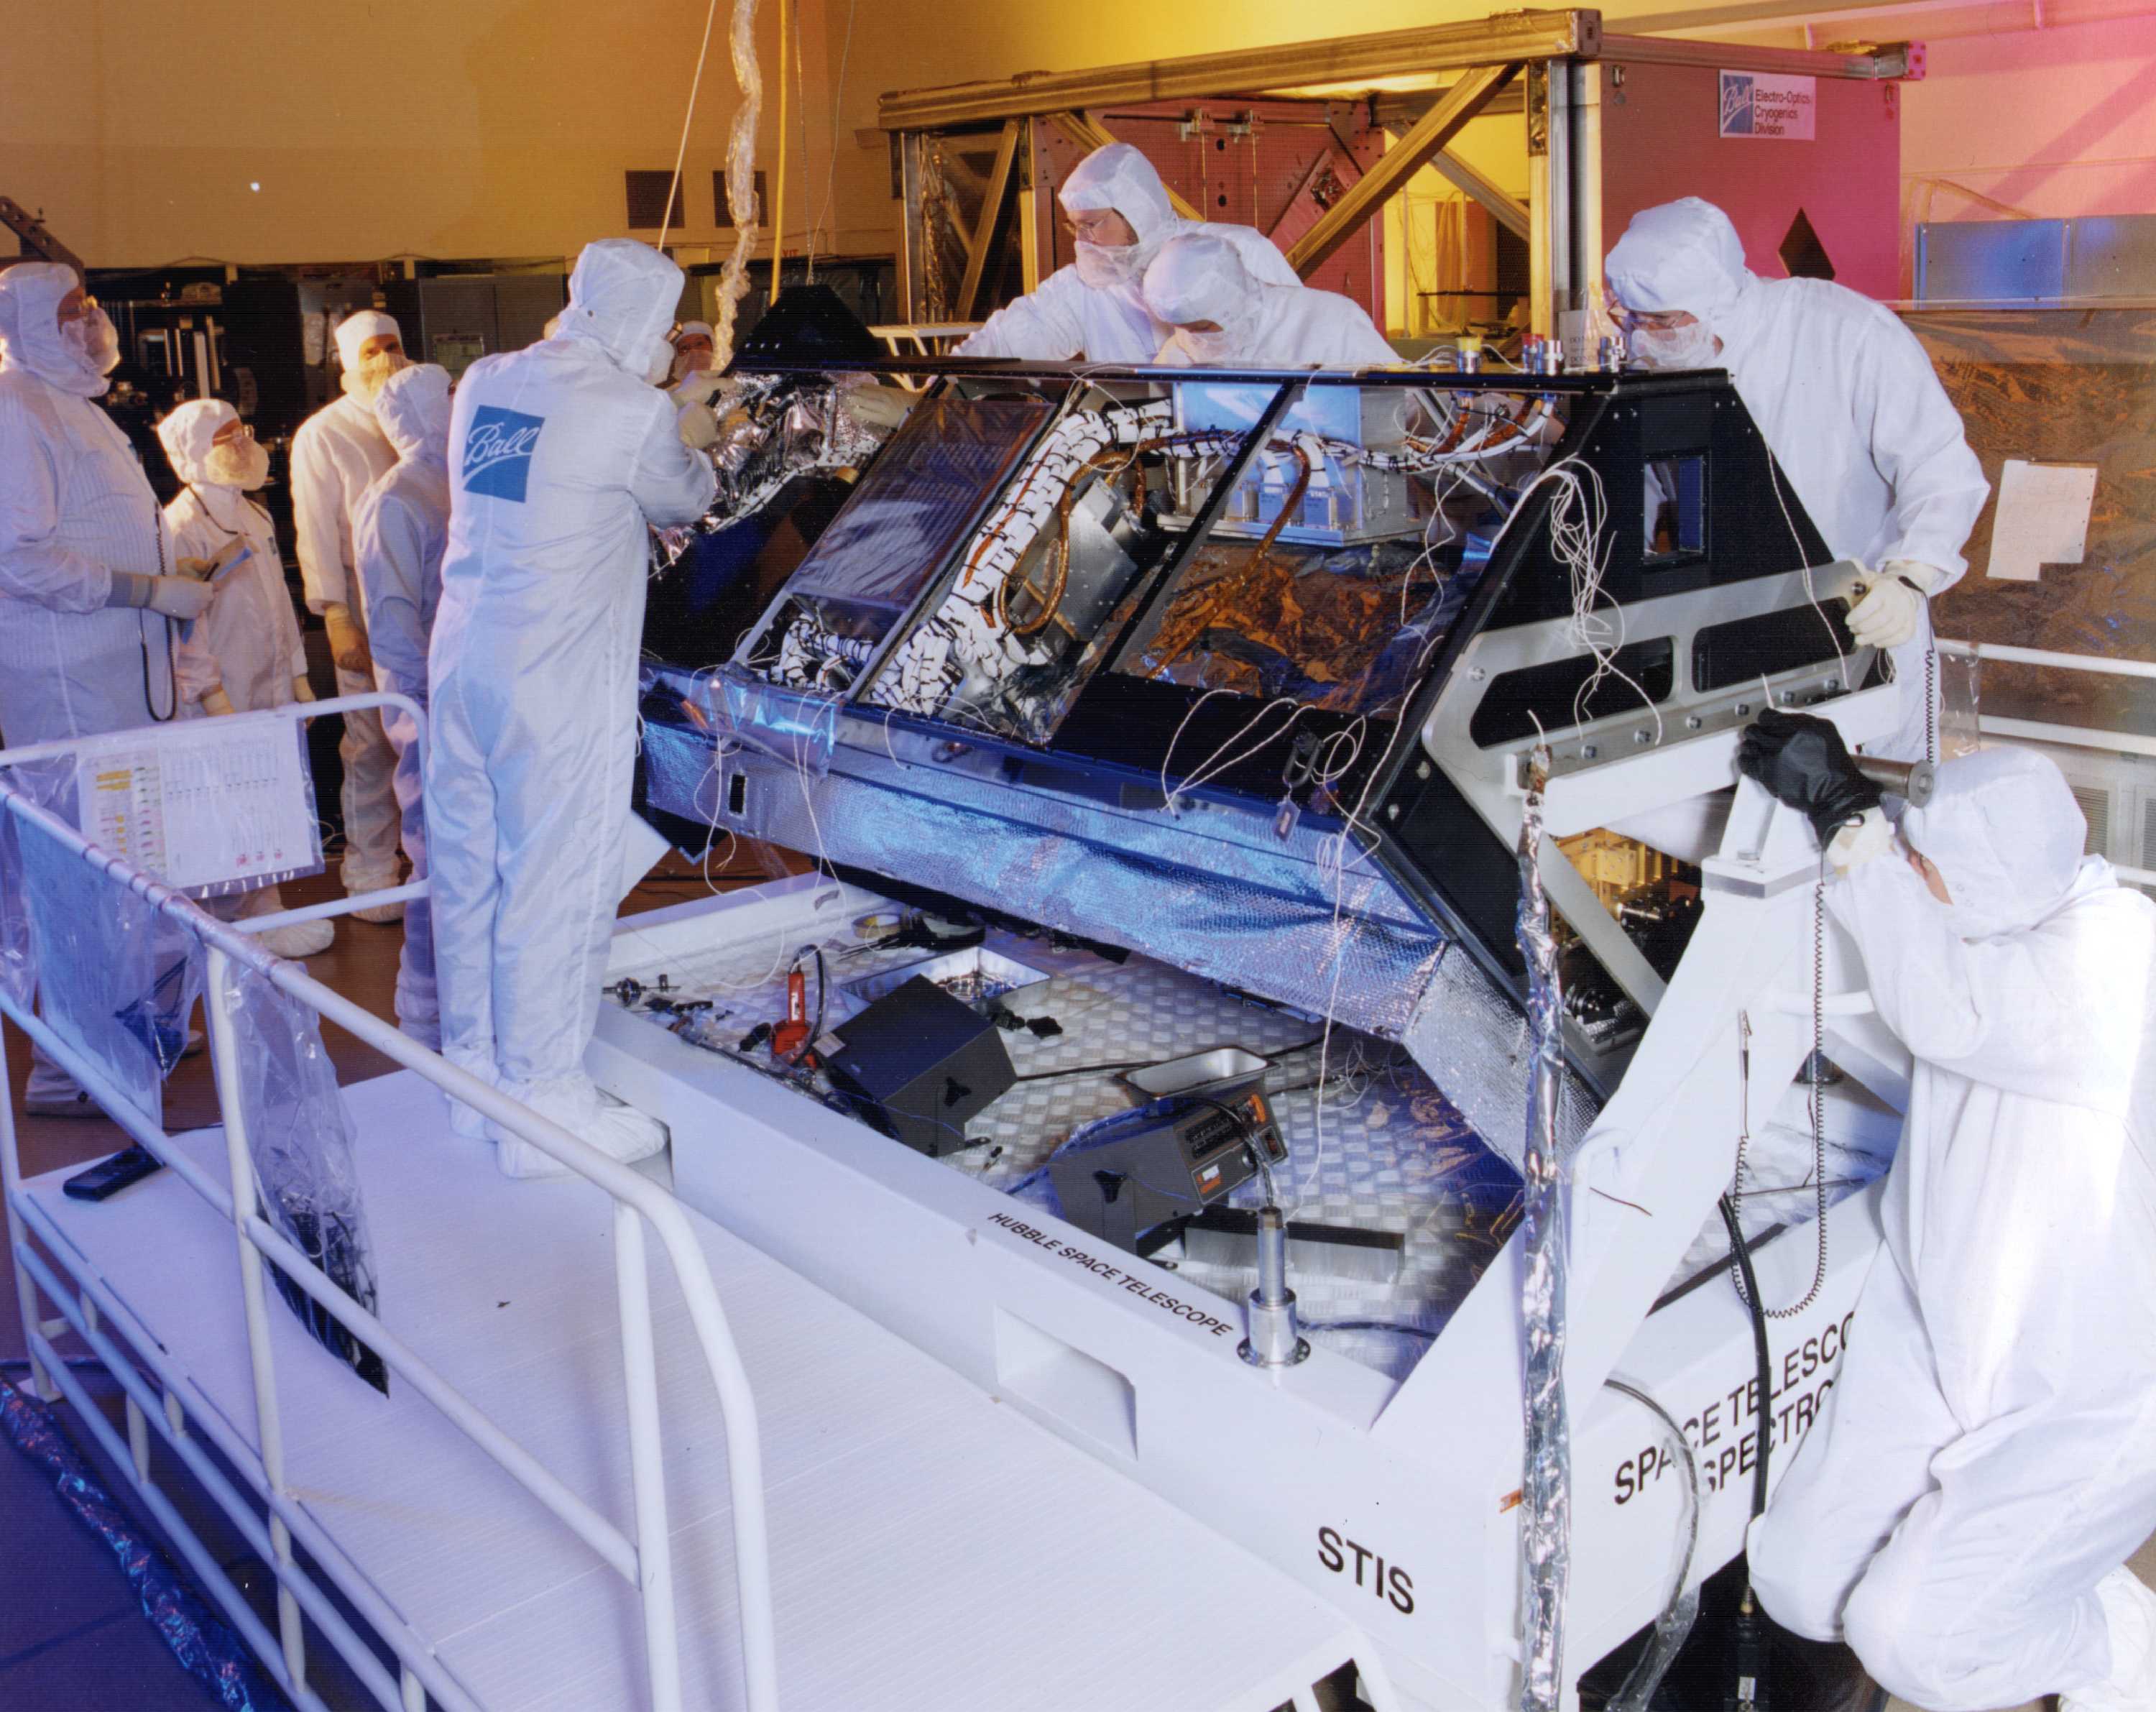 Workers in cleanroom suits work on a large box with many wires sticking out that is the Space Telescope Imaging Spectrograph